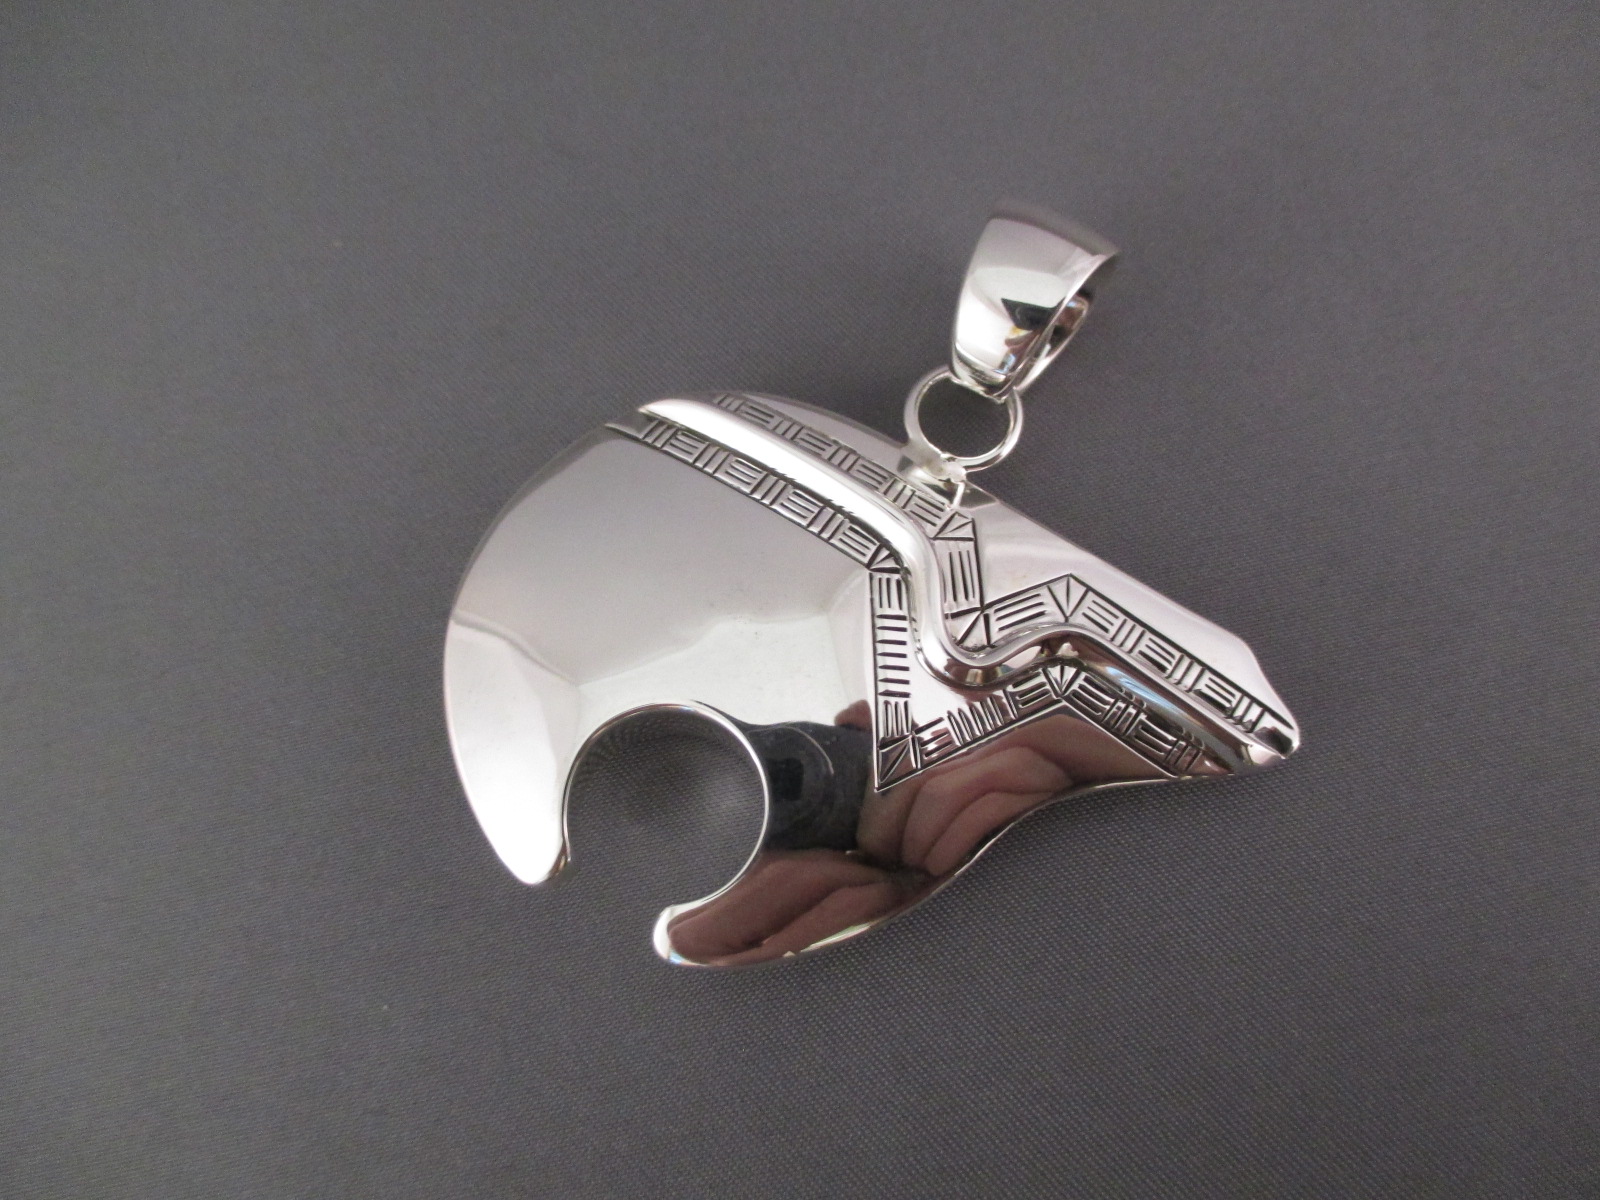 Larger Sterling Silver Bear Pendant by Native American Navajo Indian jewelry artist, Artie Yellowhorse $295-